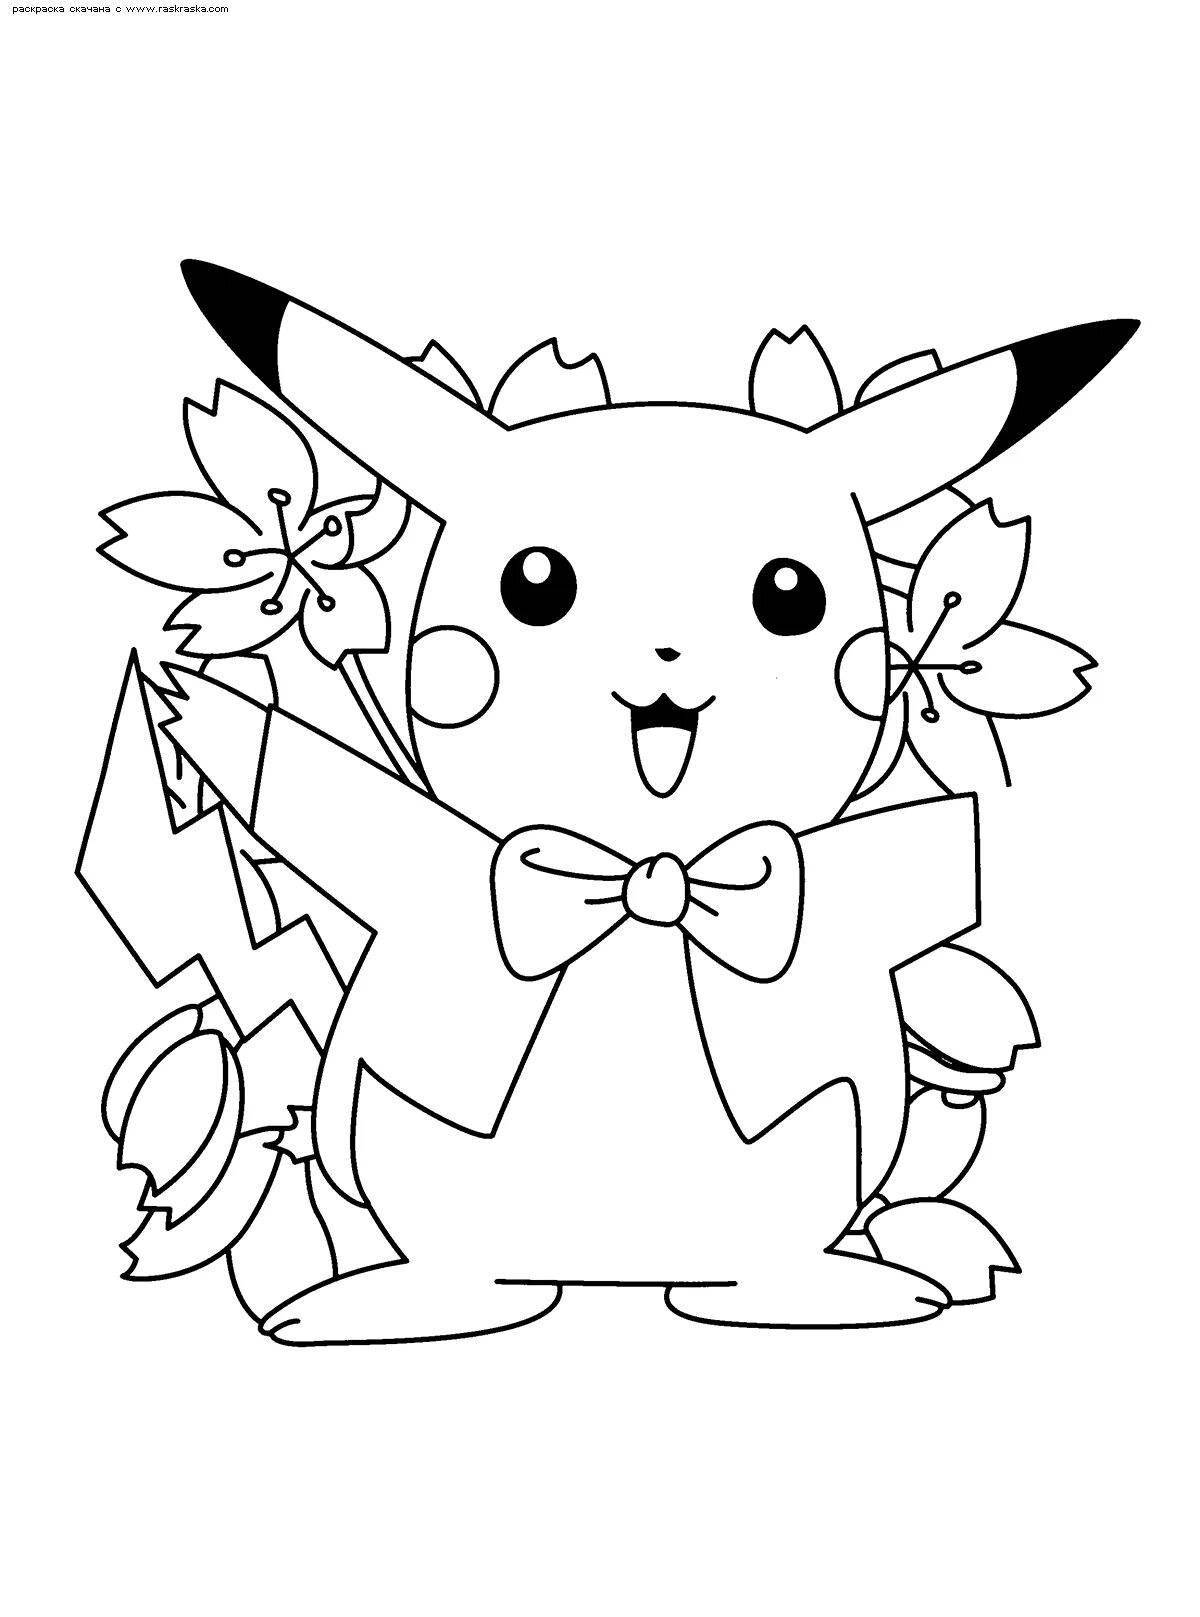 Adorable pokemon coloring book for kids